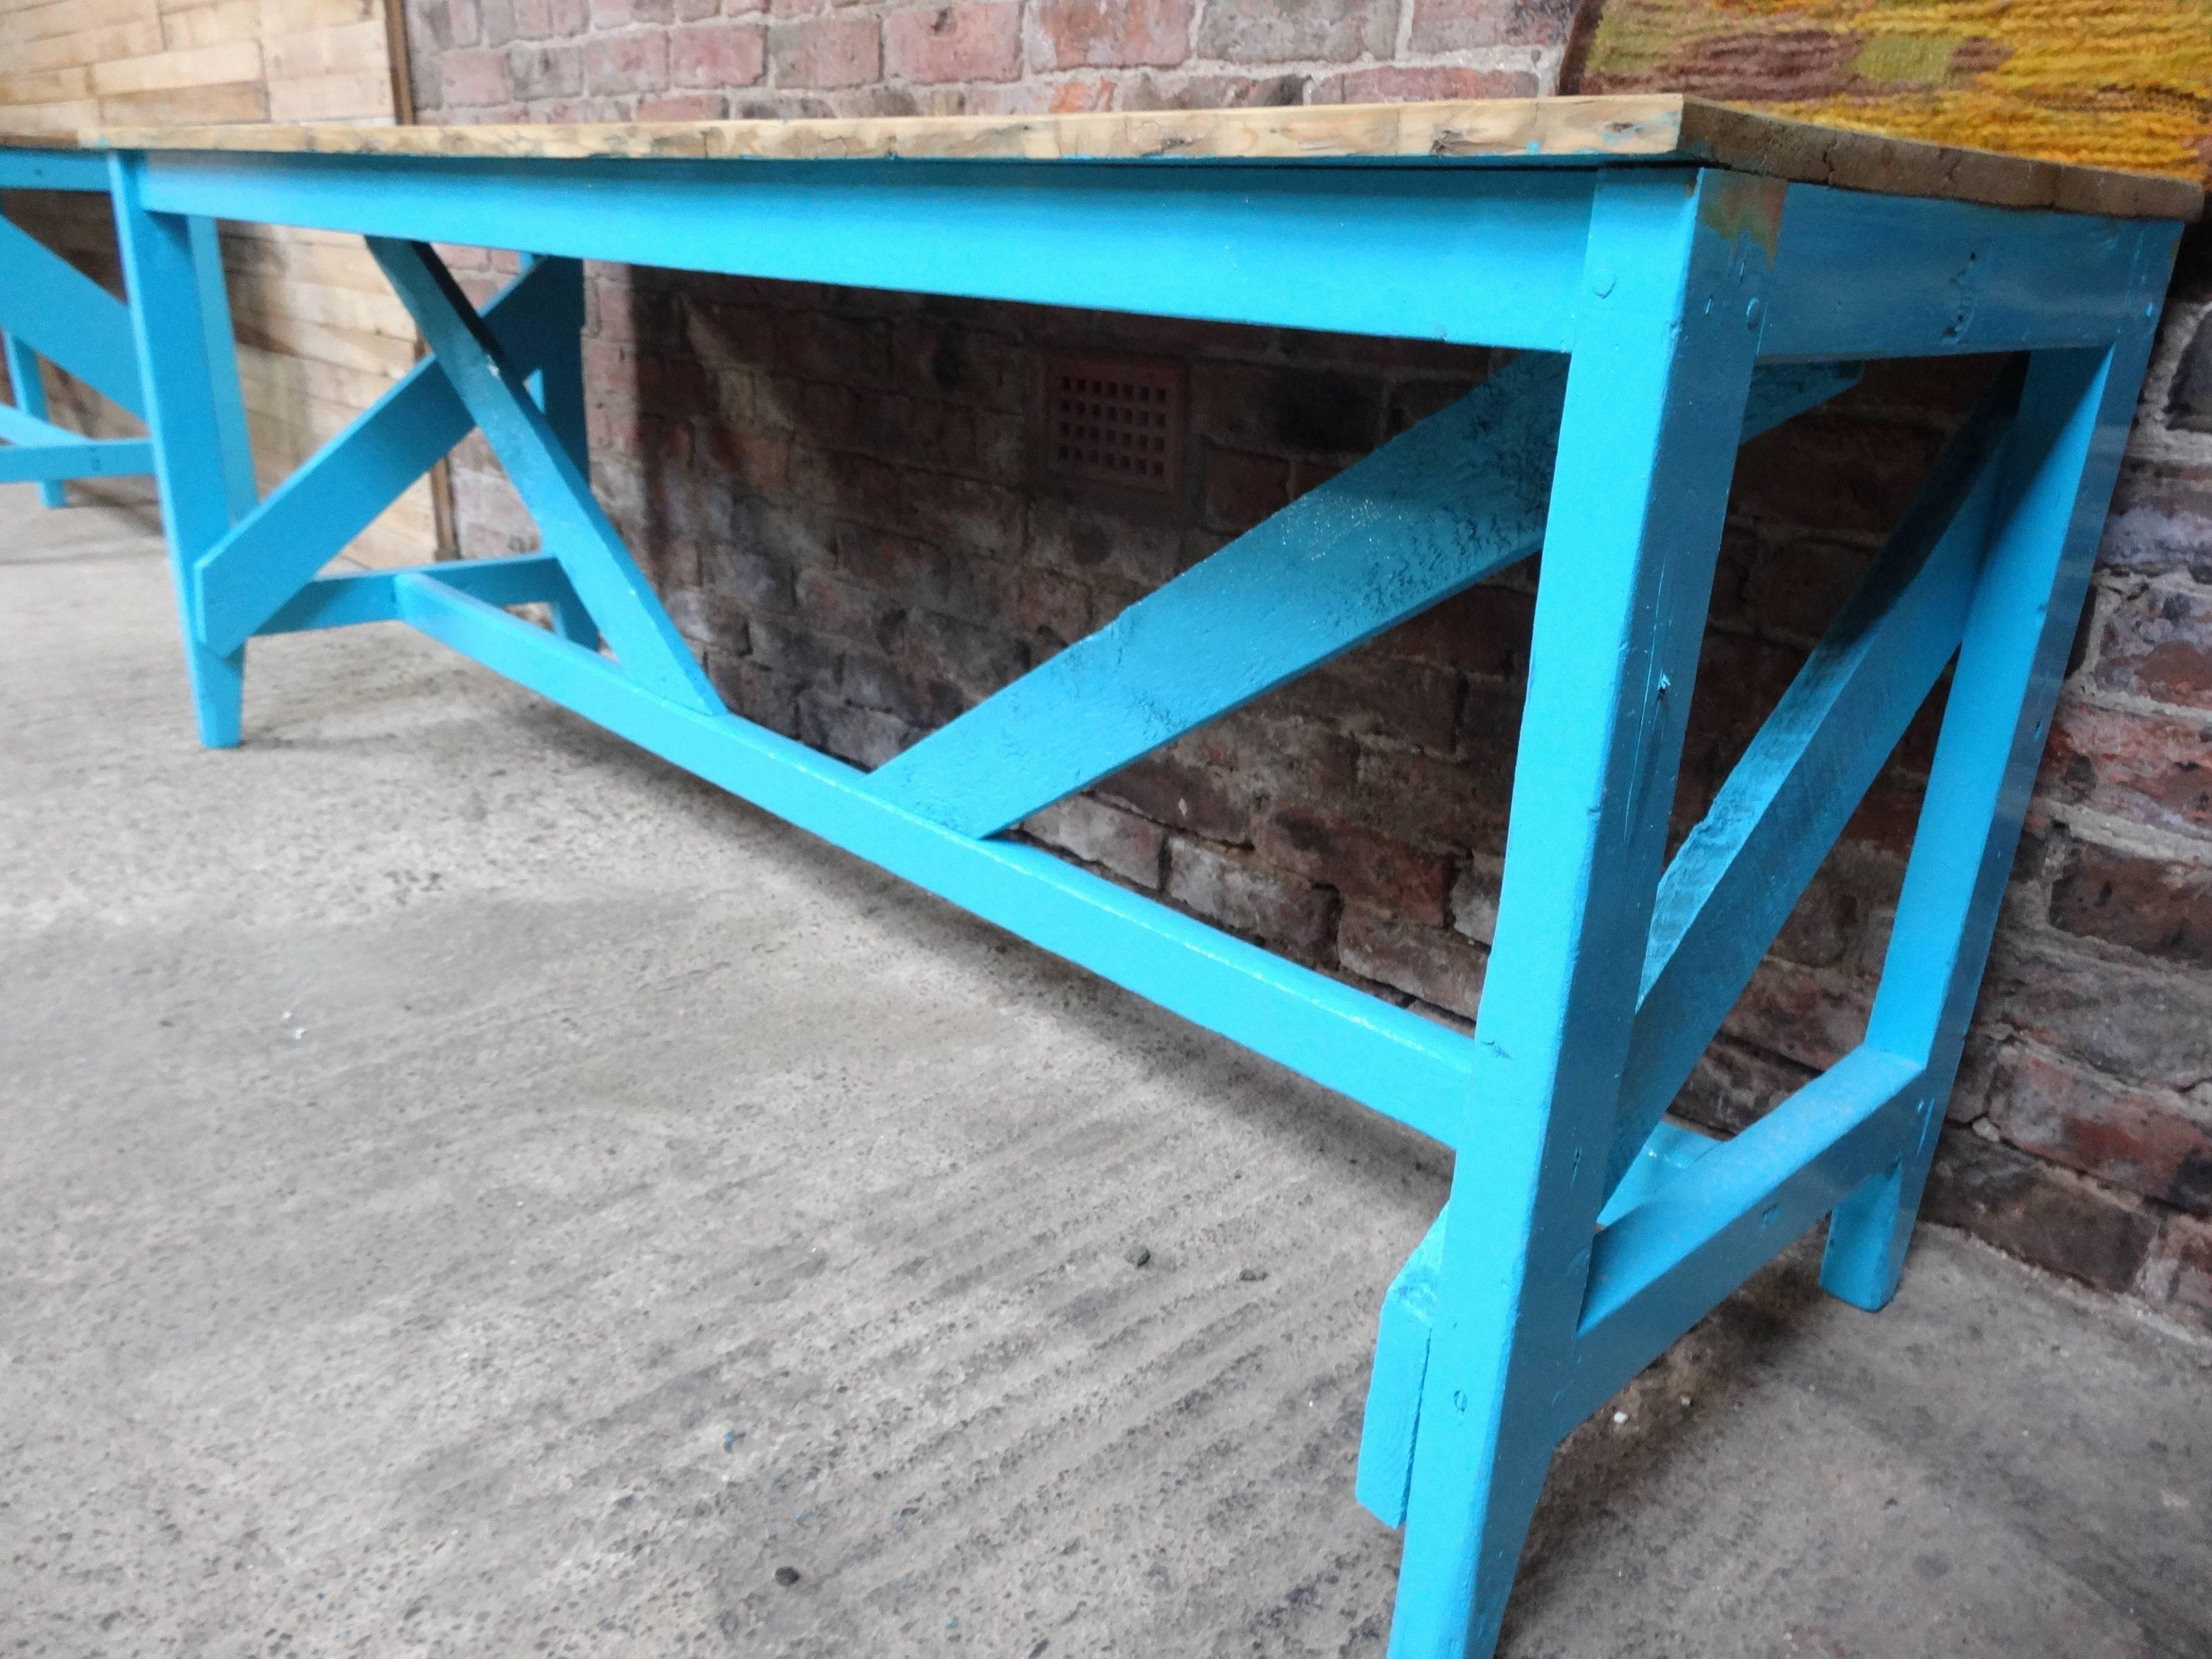 Industrial fabric cutting table we bought this out of the Windsor of Woollies knitwear mill, they made fabrics for the European royal families. This table would be ideal for a shop fitout to display goods, we have two other blue tables in this style